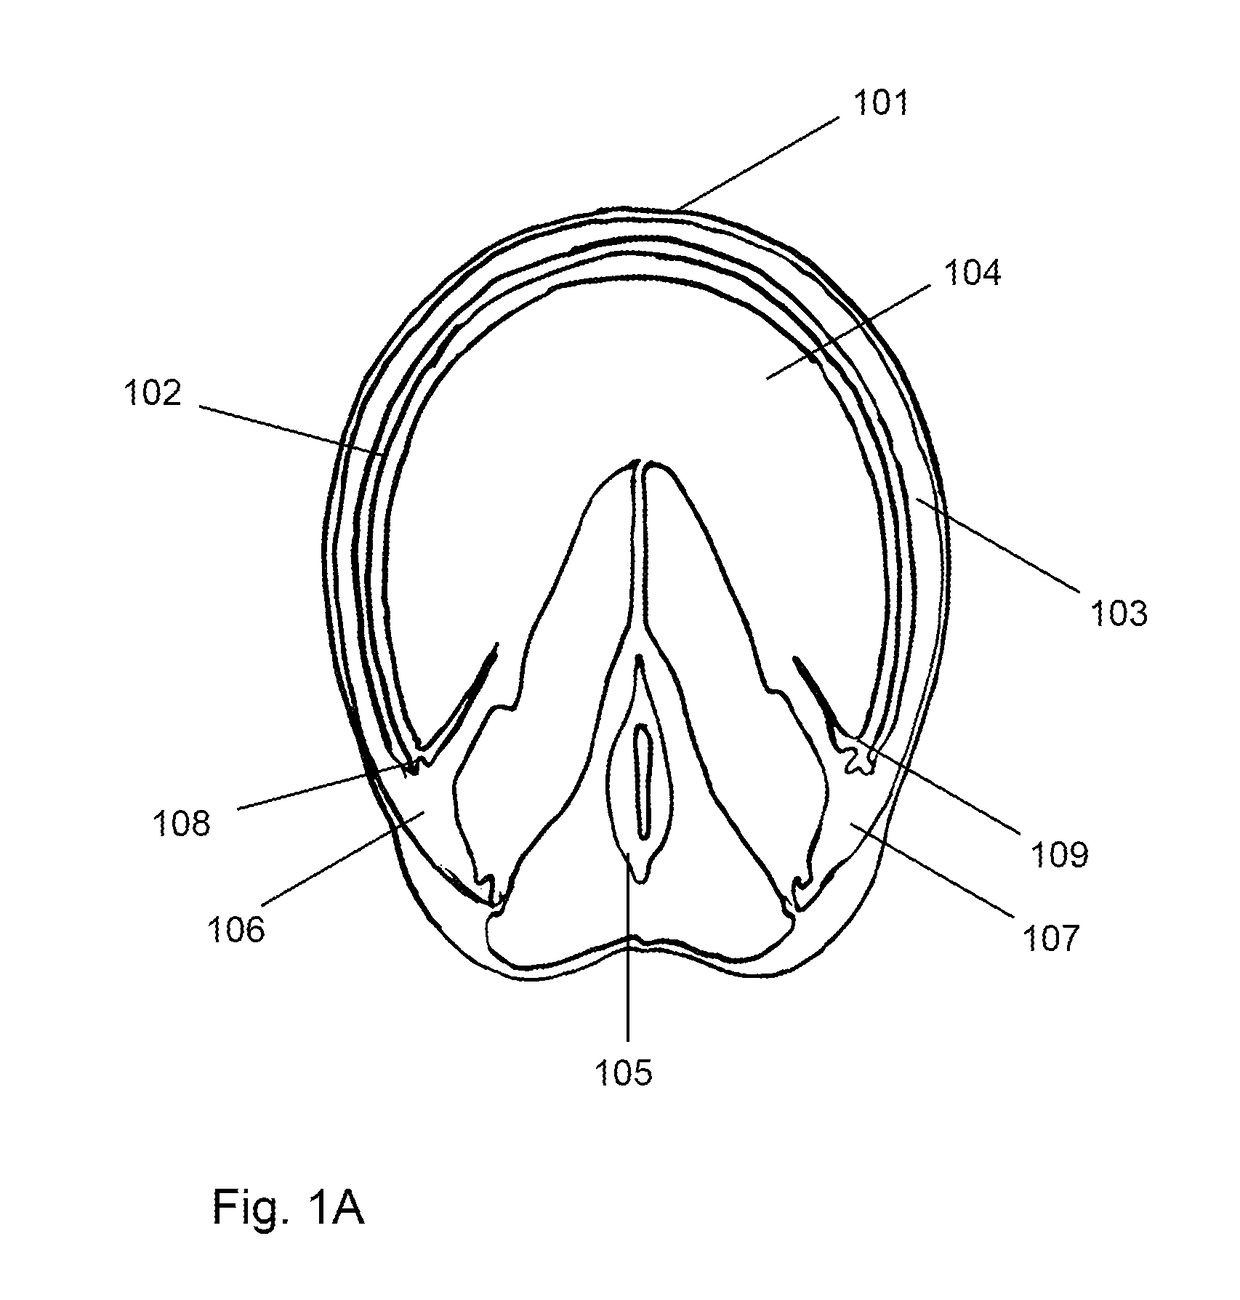 Horse hoof pad-like support device